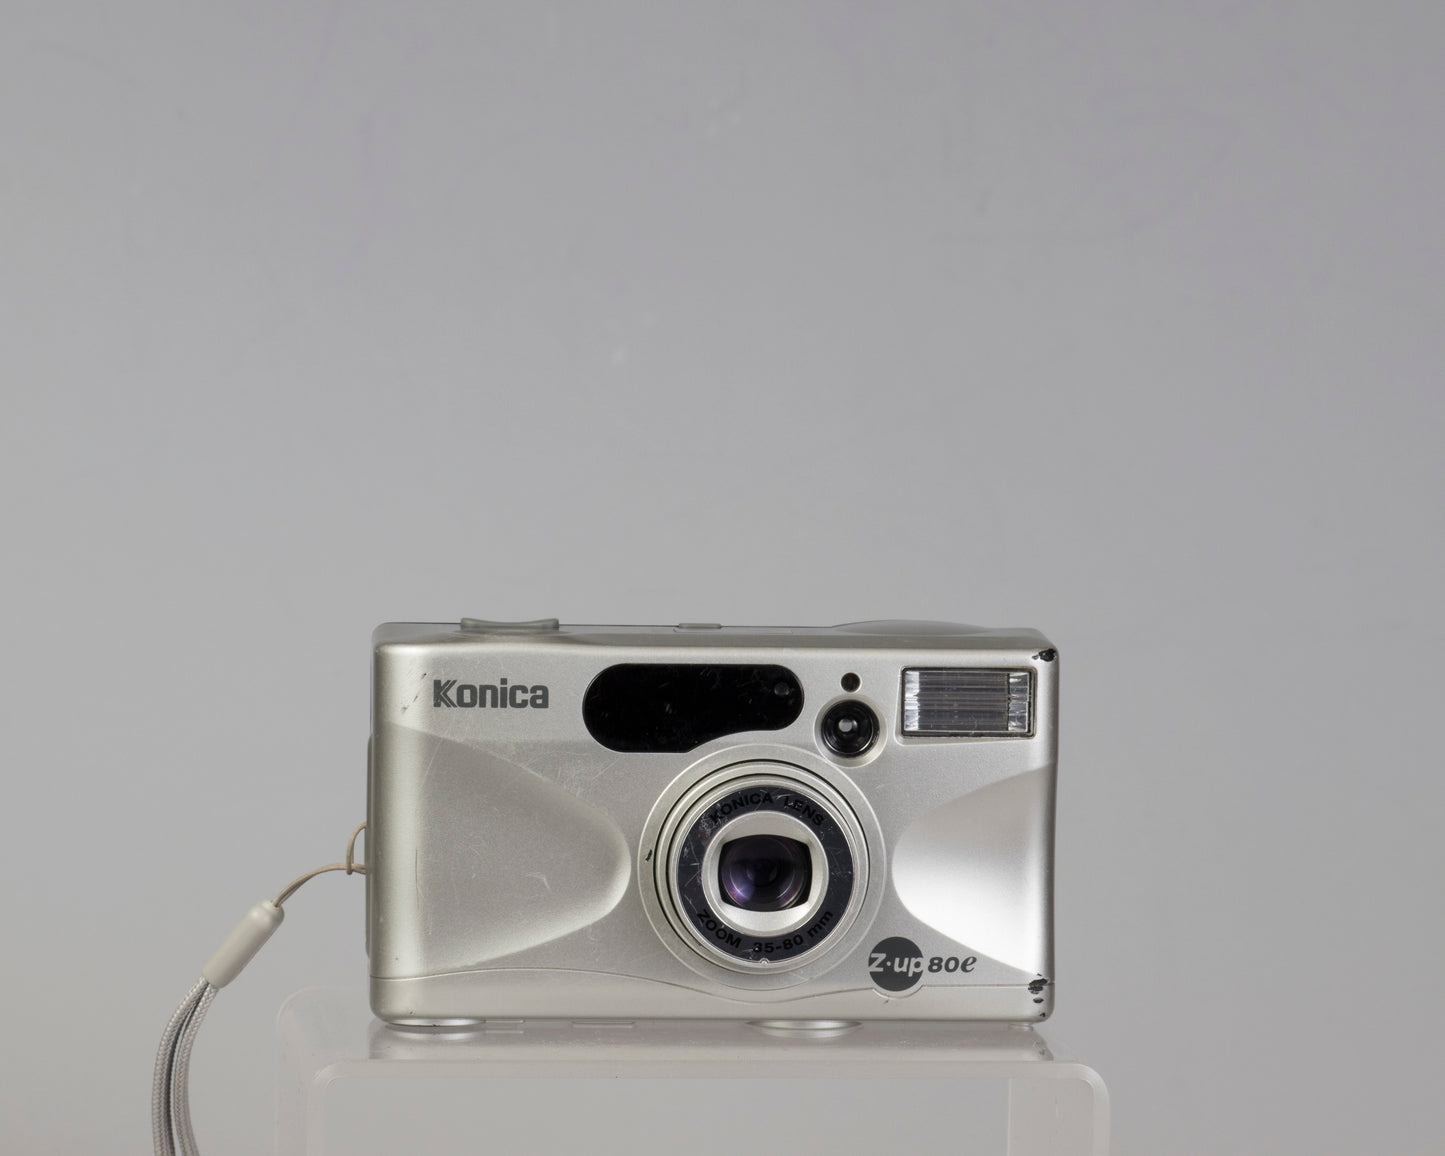 Konica Z-Up 80e 35mm point-and-shoot camera